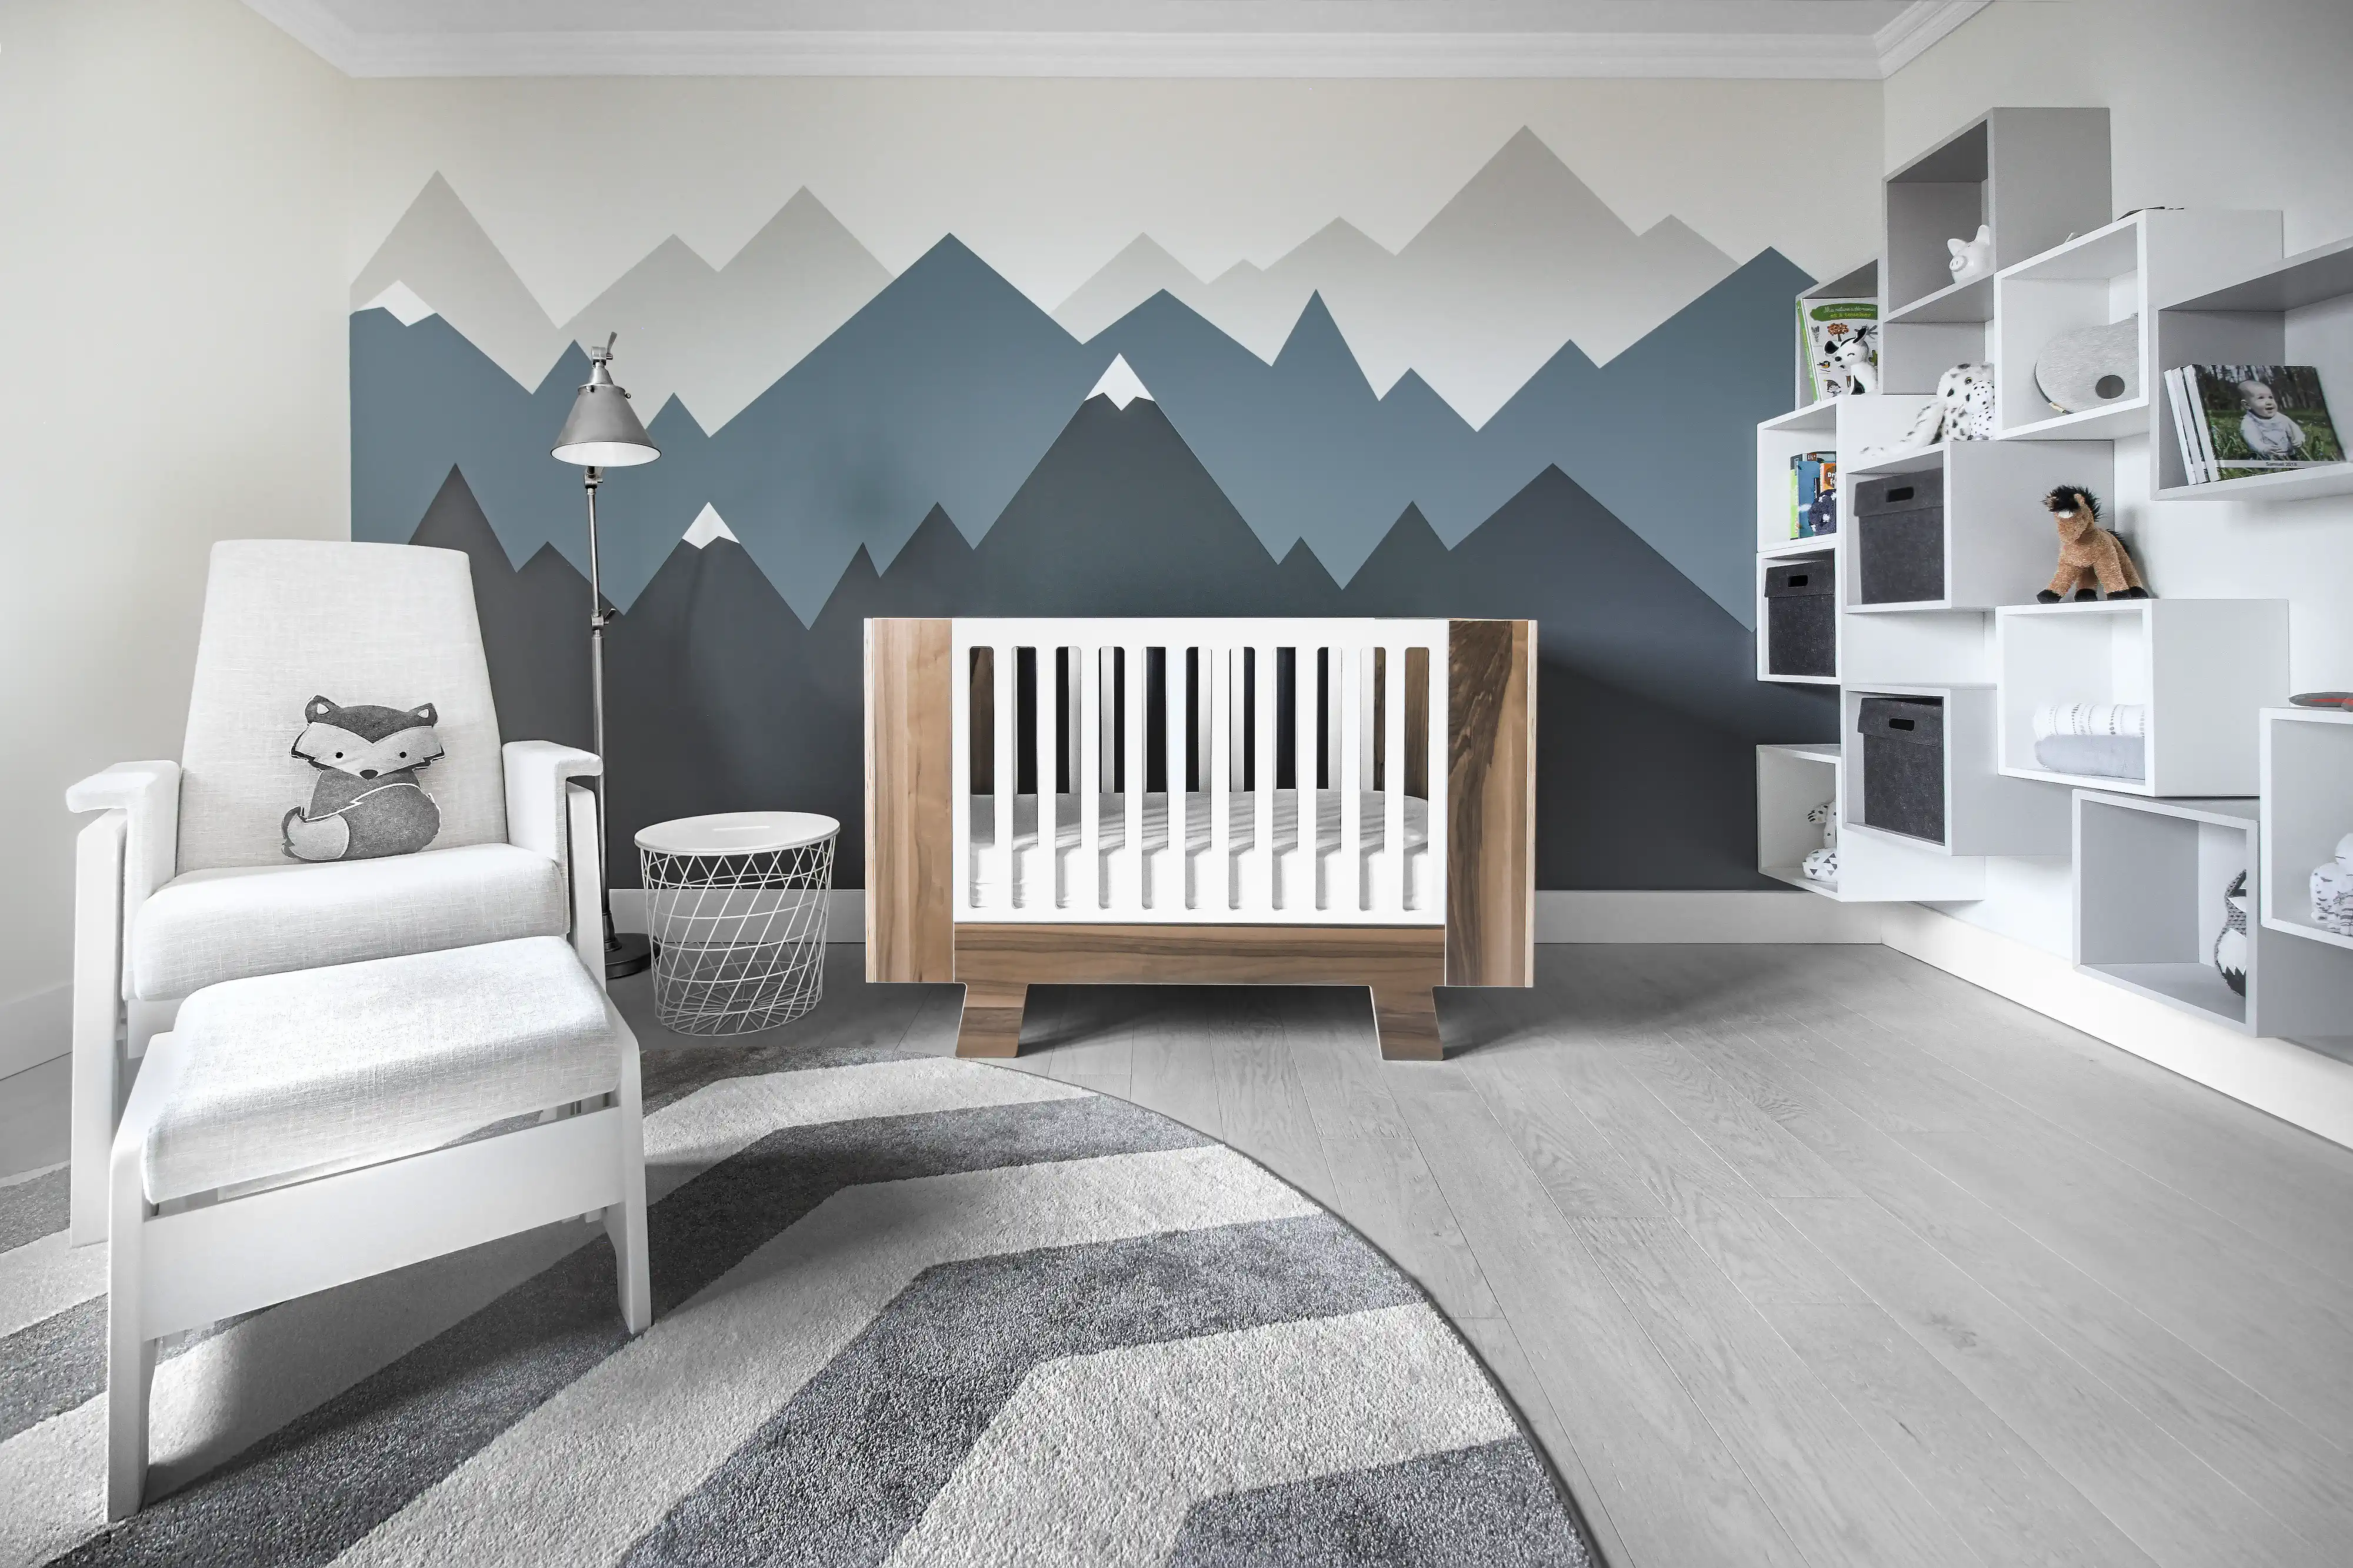 Nursery room with a mountain mural, white crib, rocking chair, and bookshelf filled with toys, interior by Sarah Brown Design